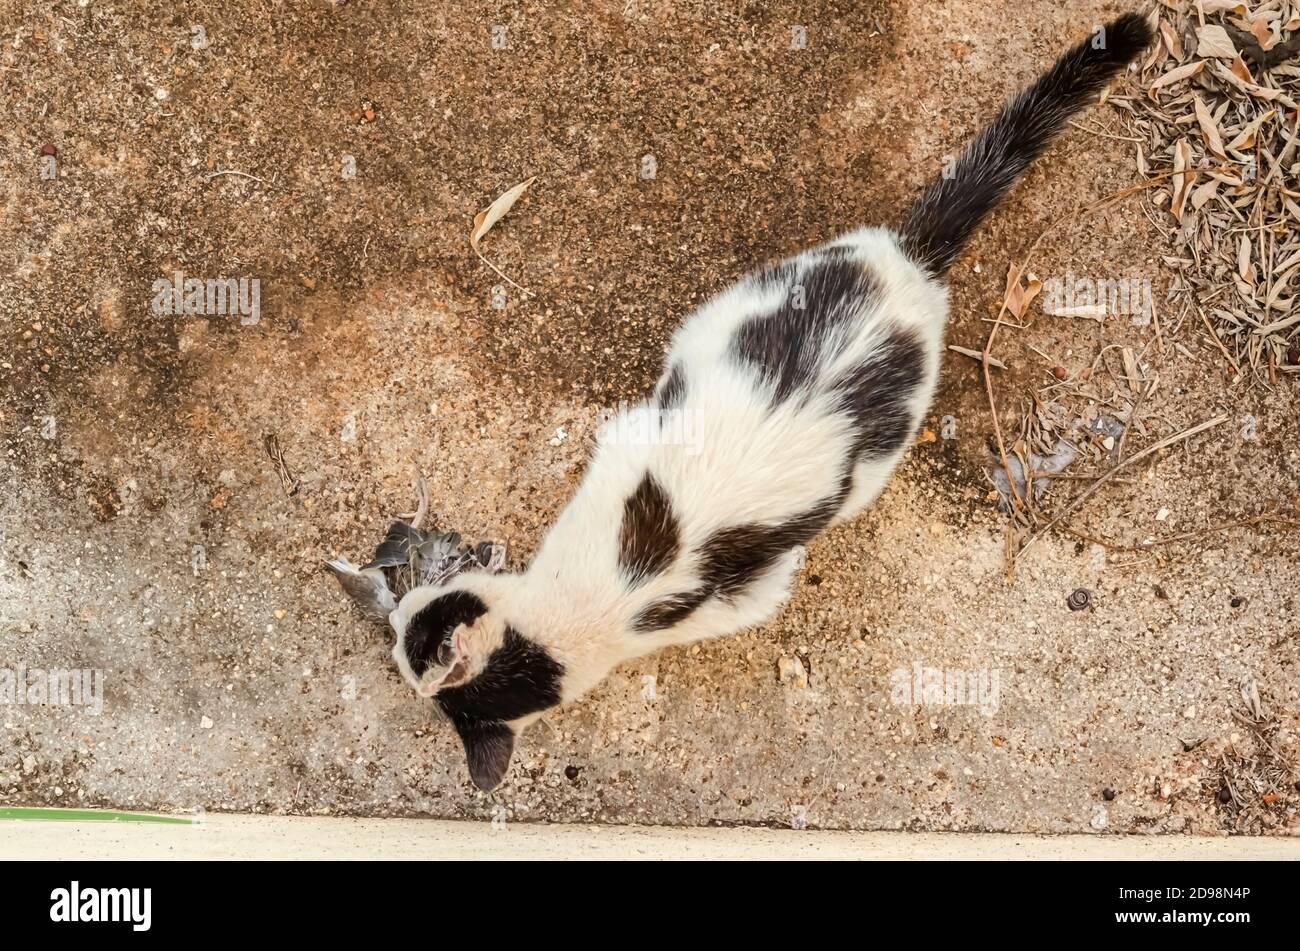 A Lemur cat crouches on a concrete pavement while eating a bird she caught. Stock Photo